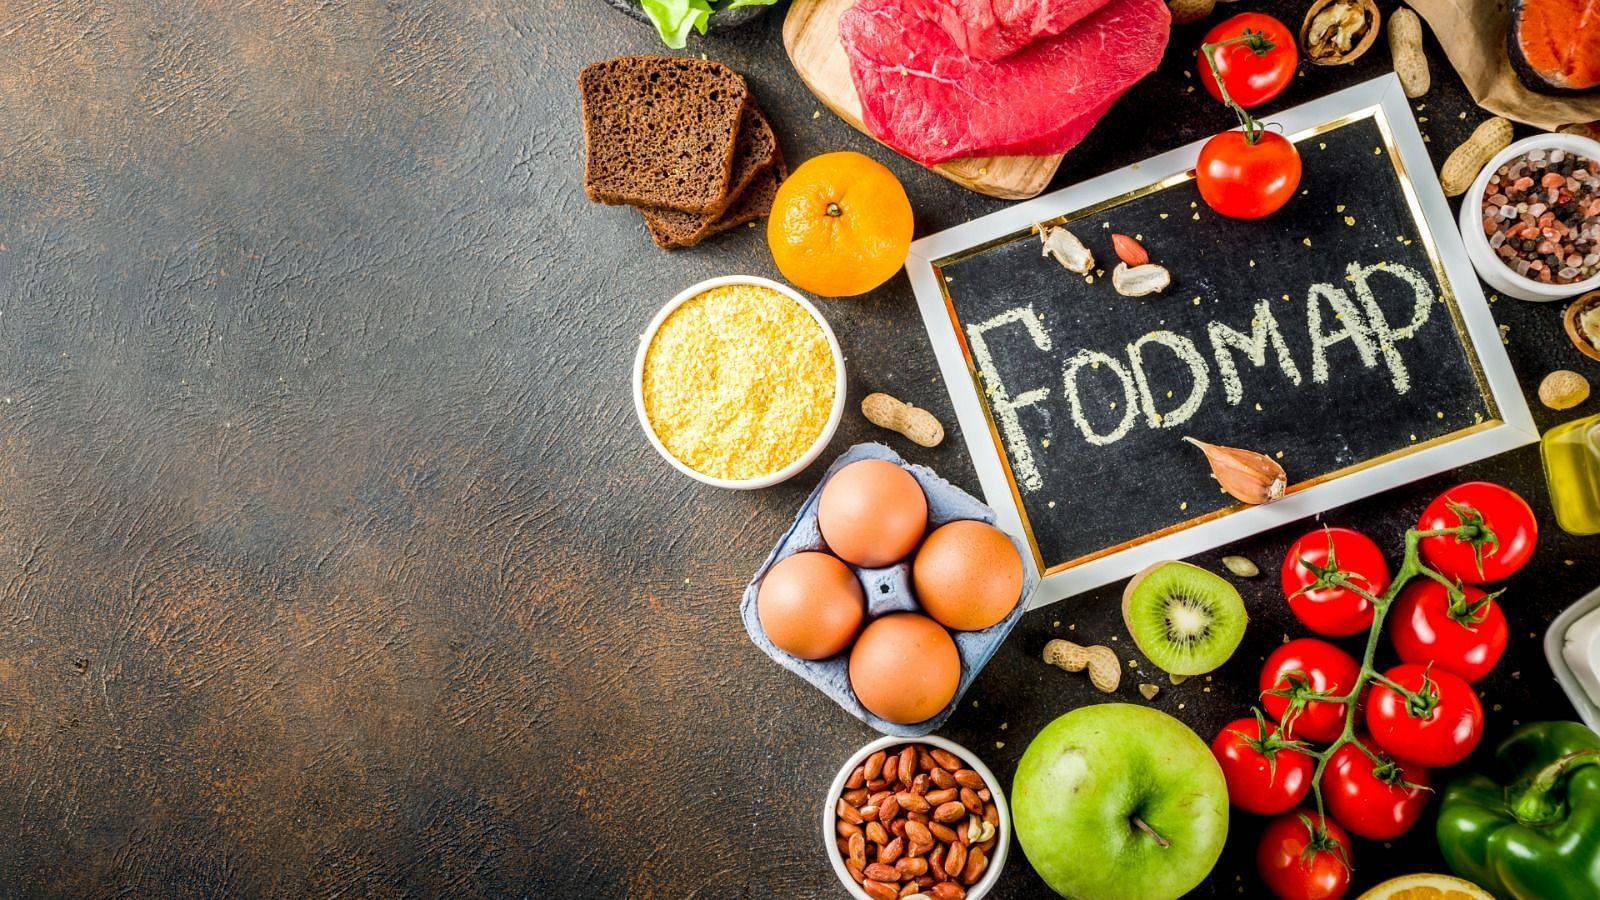 The diet helps in spotting the right foods (Image via Getty Images)